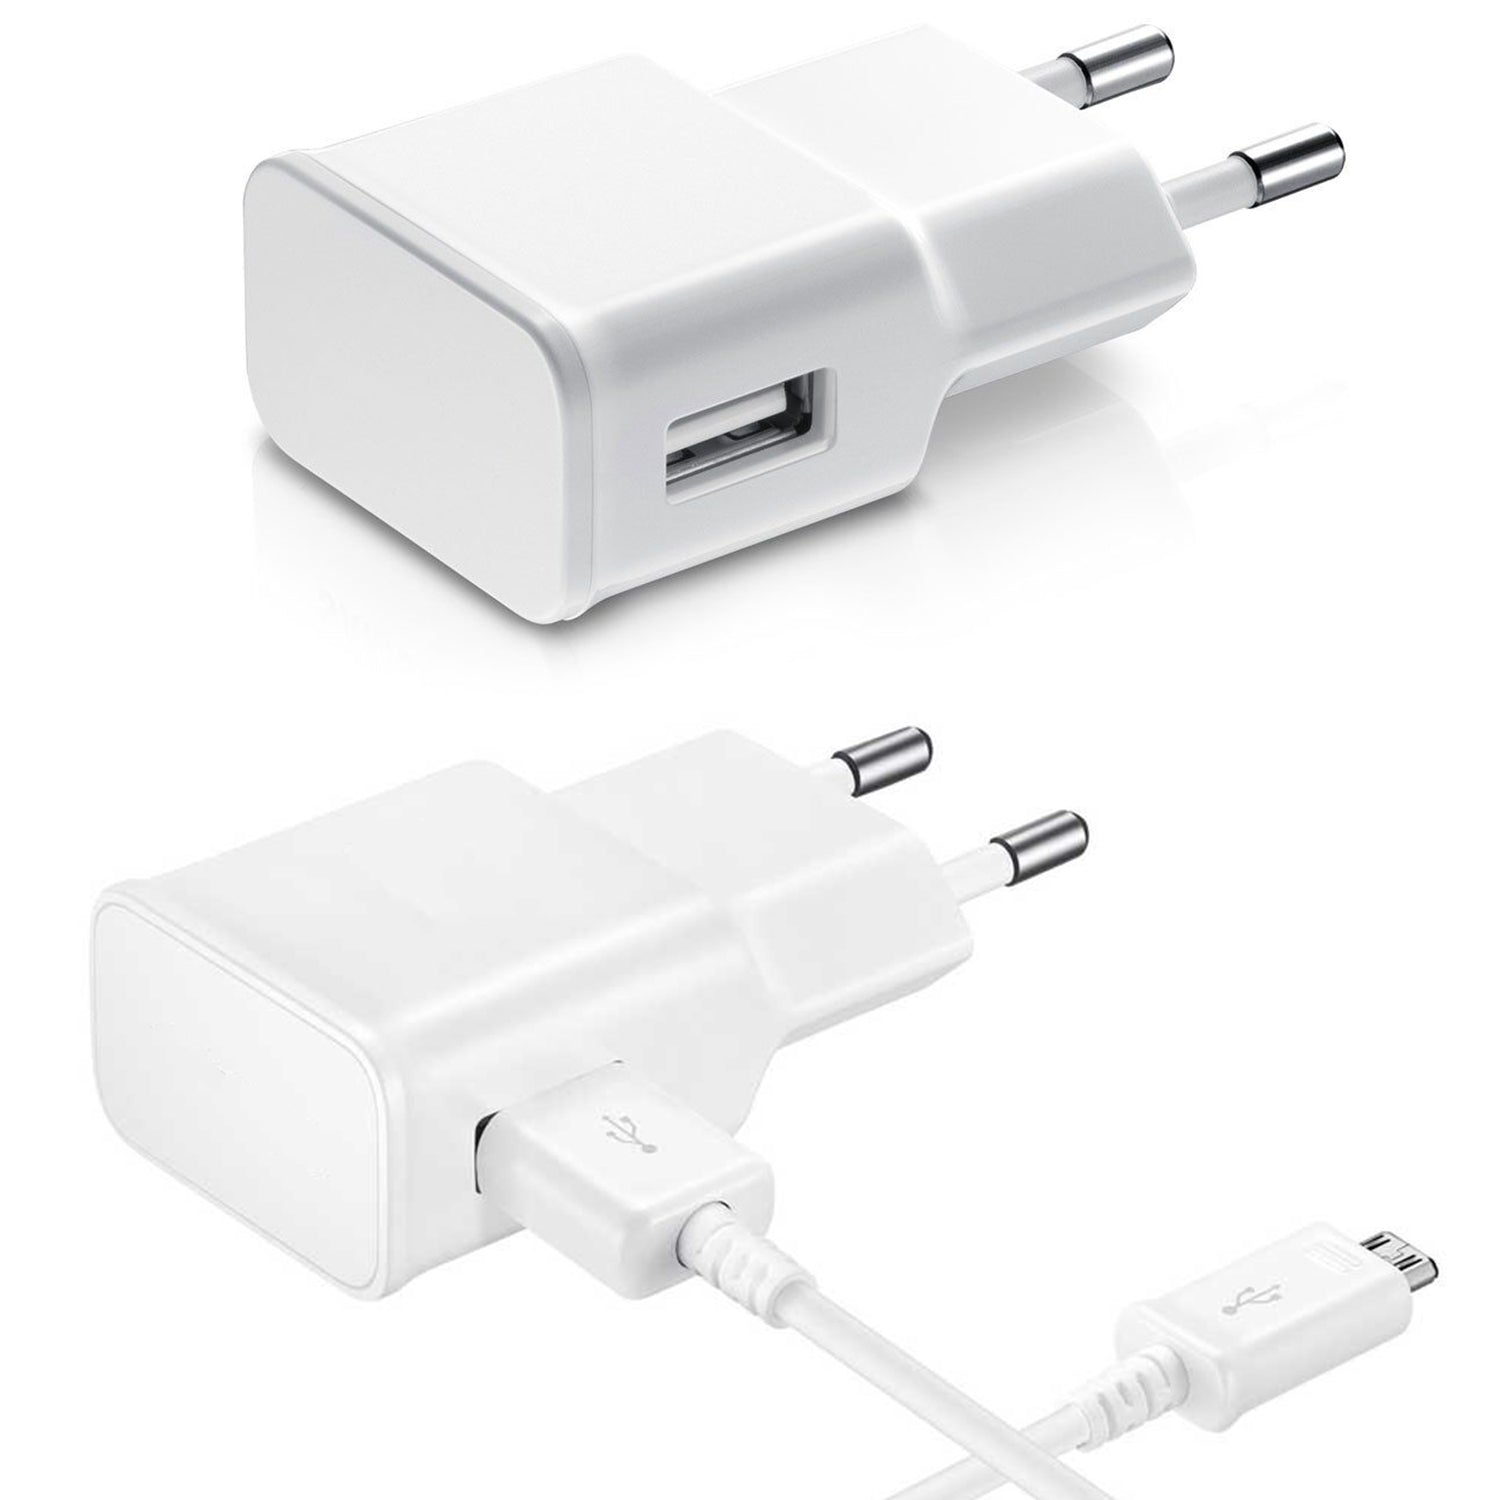 6102 Fast Charging Power Adaptor Without Cable for Devices (Adaptor Only)